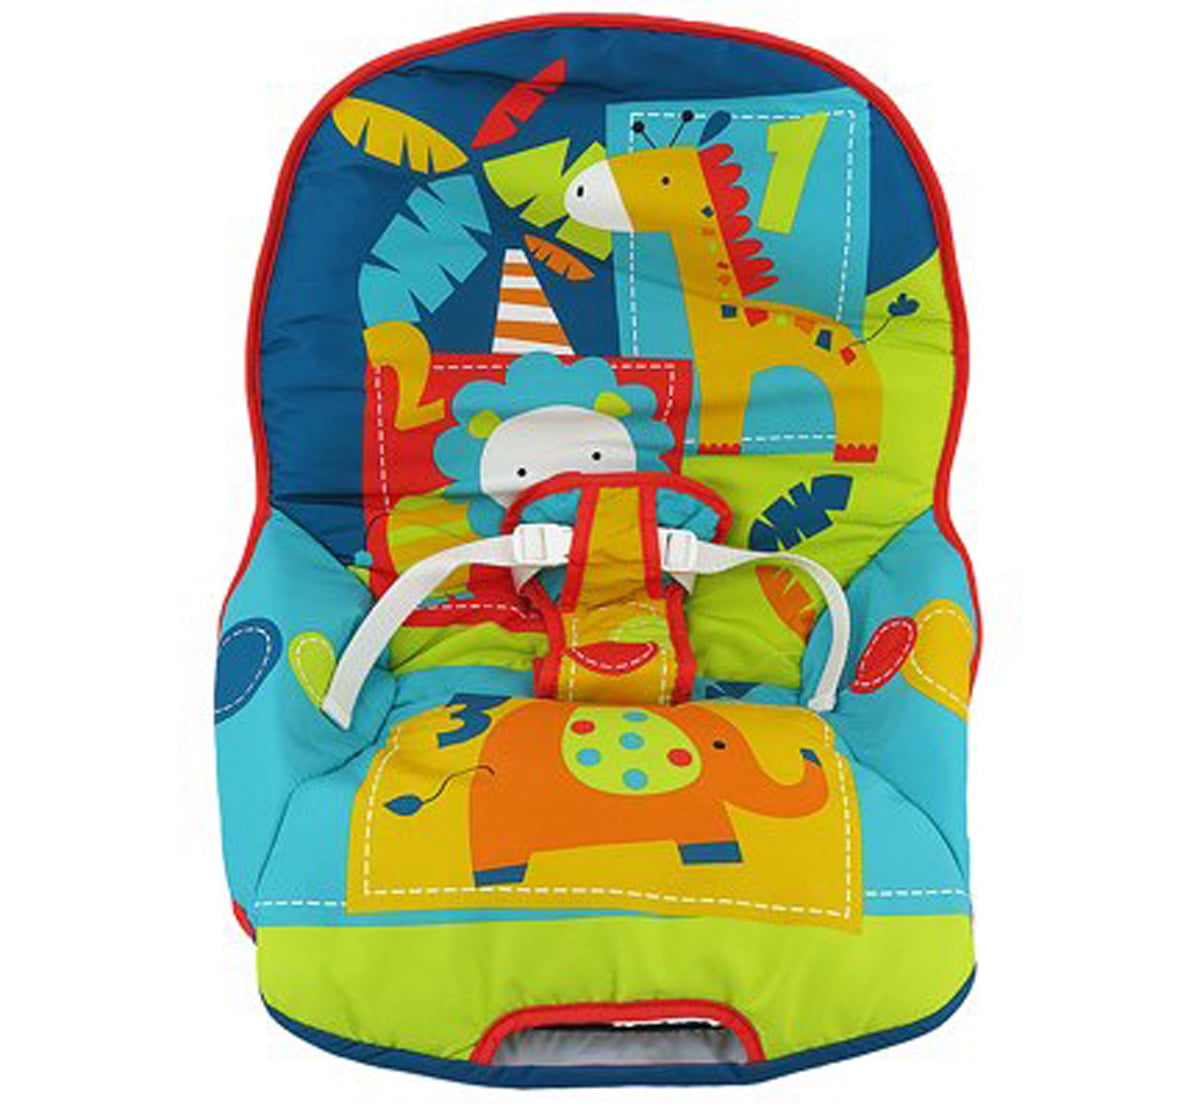 fisher price rocker replacement cover